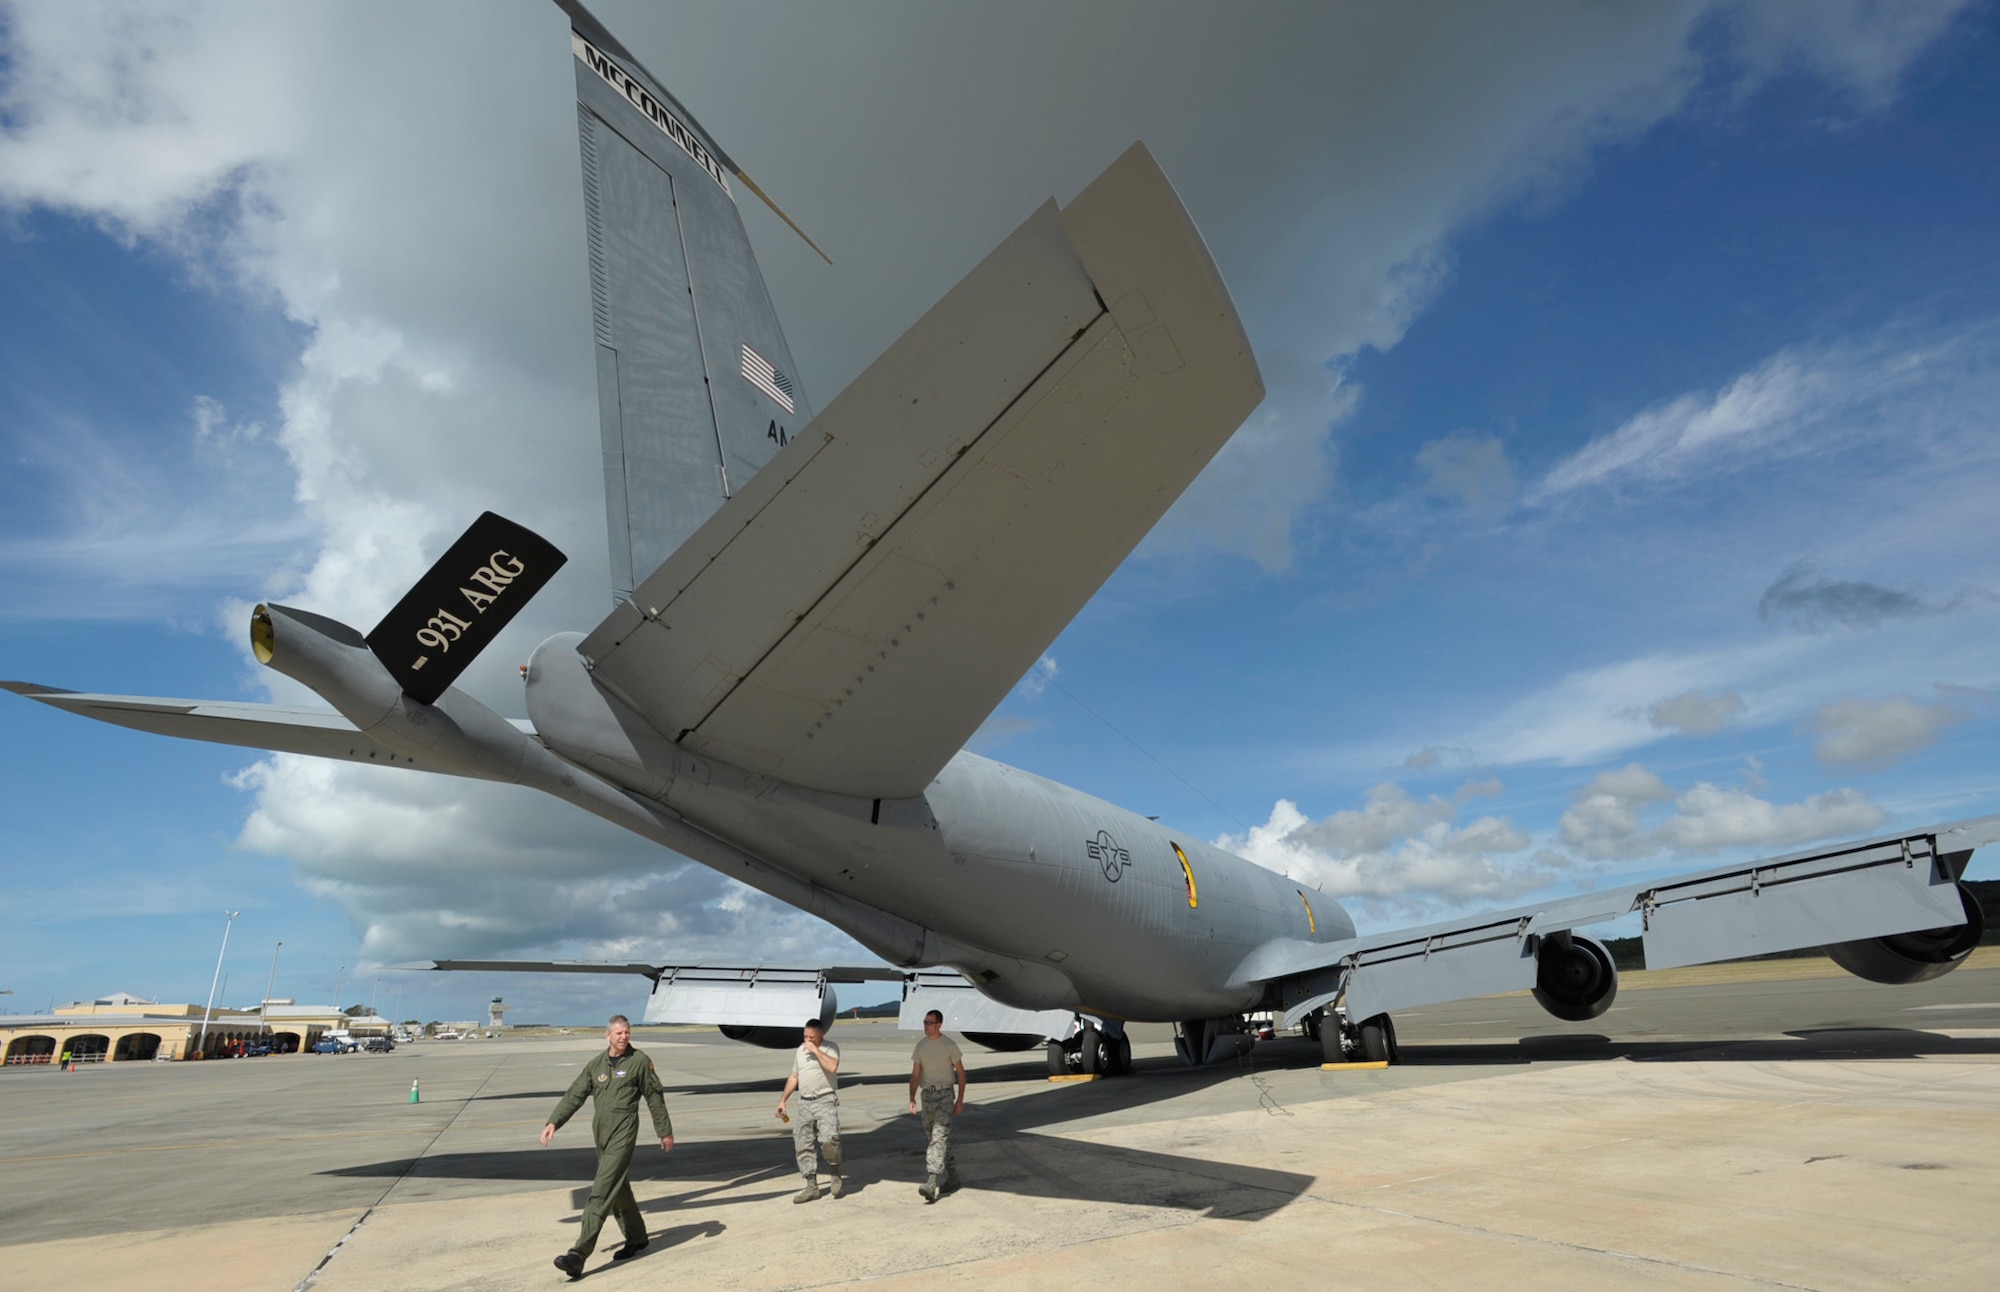 Master Sgt. Paul McGinnis and Senior Airman Alan Cooper (at right) follow Lt. Col. Keith Kontz while inspecting a KC-135 Stratotanker before departing from St. Croix, U.S. Virgin Islands on March 1. Aeromedical evacuation training missions to St. Croix allow pilots to complete overseas training requirements. Colonel Kontz is a Reserve KC-135 pilot assigned to the 18th Air Refueling Squadron, the flying unit of the 931st Air Refueling Group at McConnell Air Force Base, Kan. Both Sergeant McGinnis and Airman Cooper are Reservists assigned to the 931st Aircraft Maintenance Squadron. (U.S. Air Force photo/Tech. Sgt. Jason Schaap)